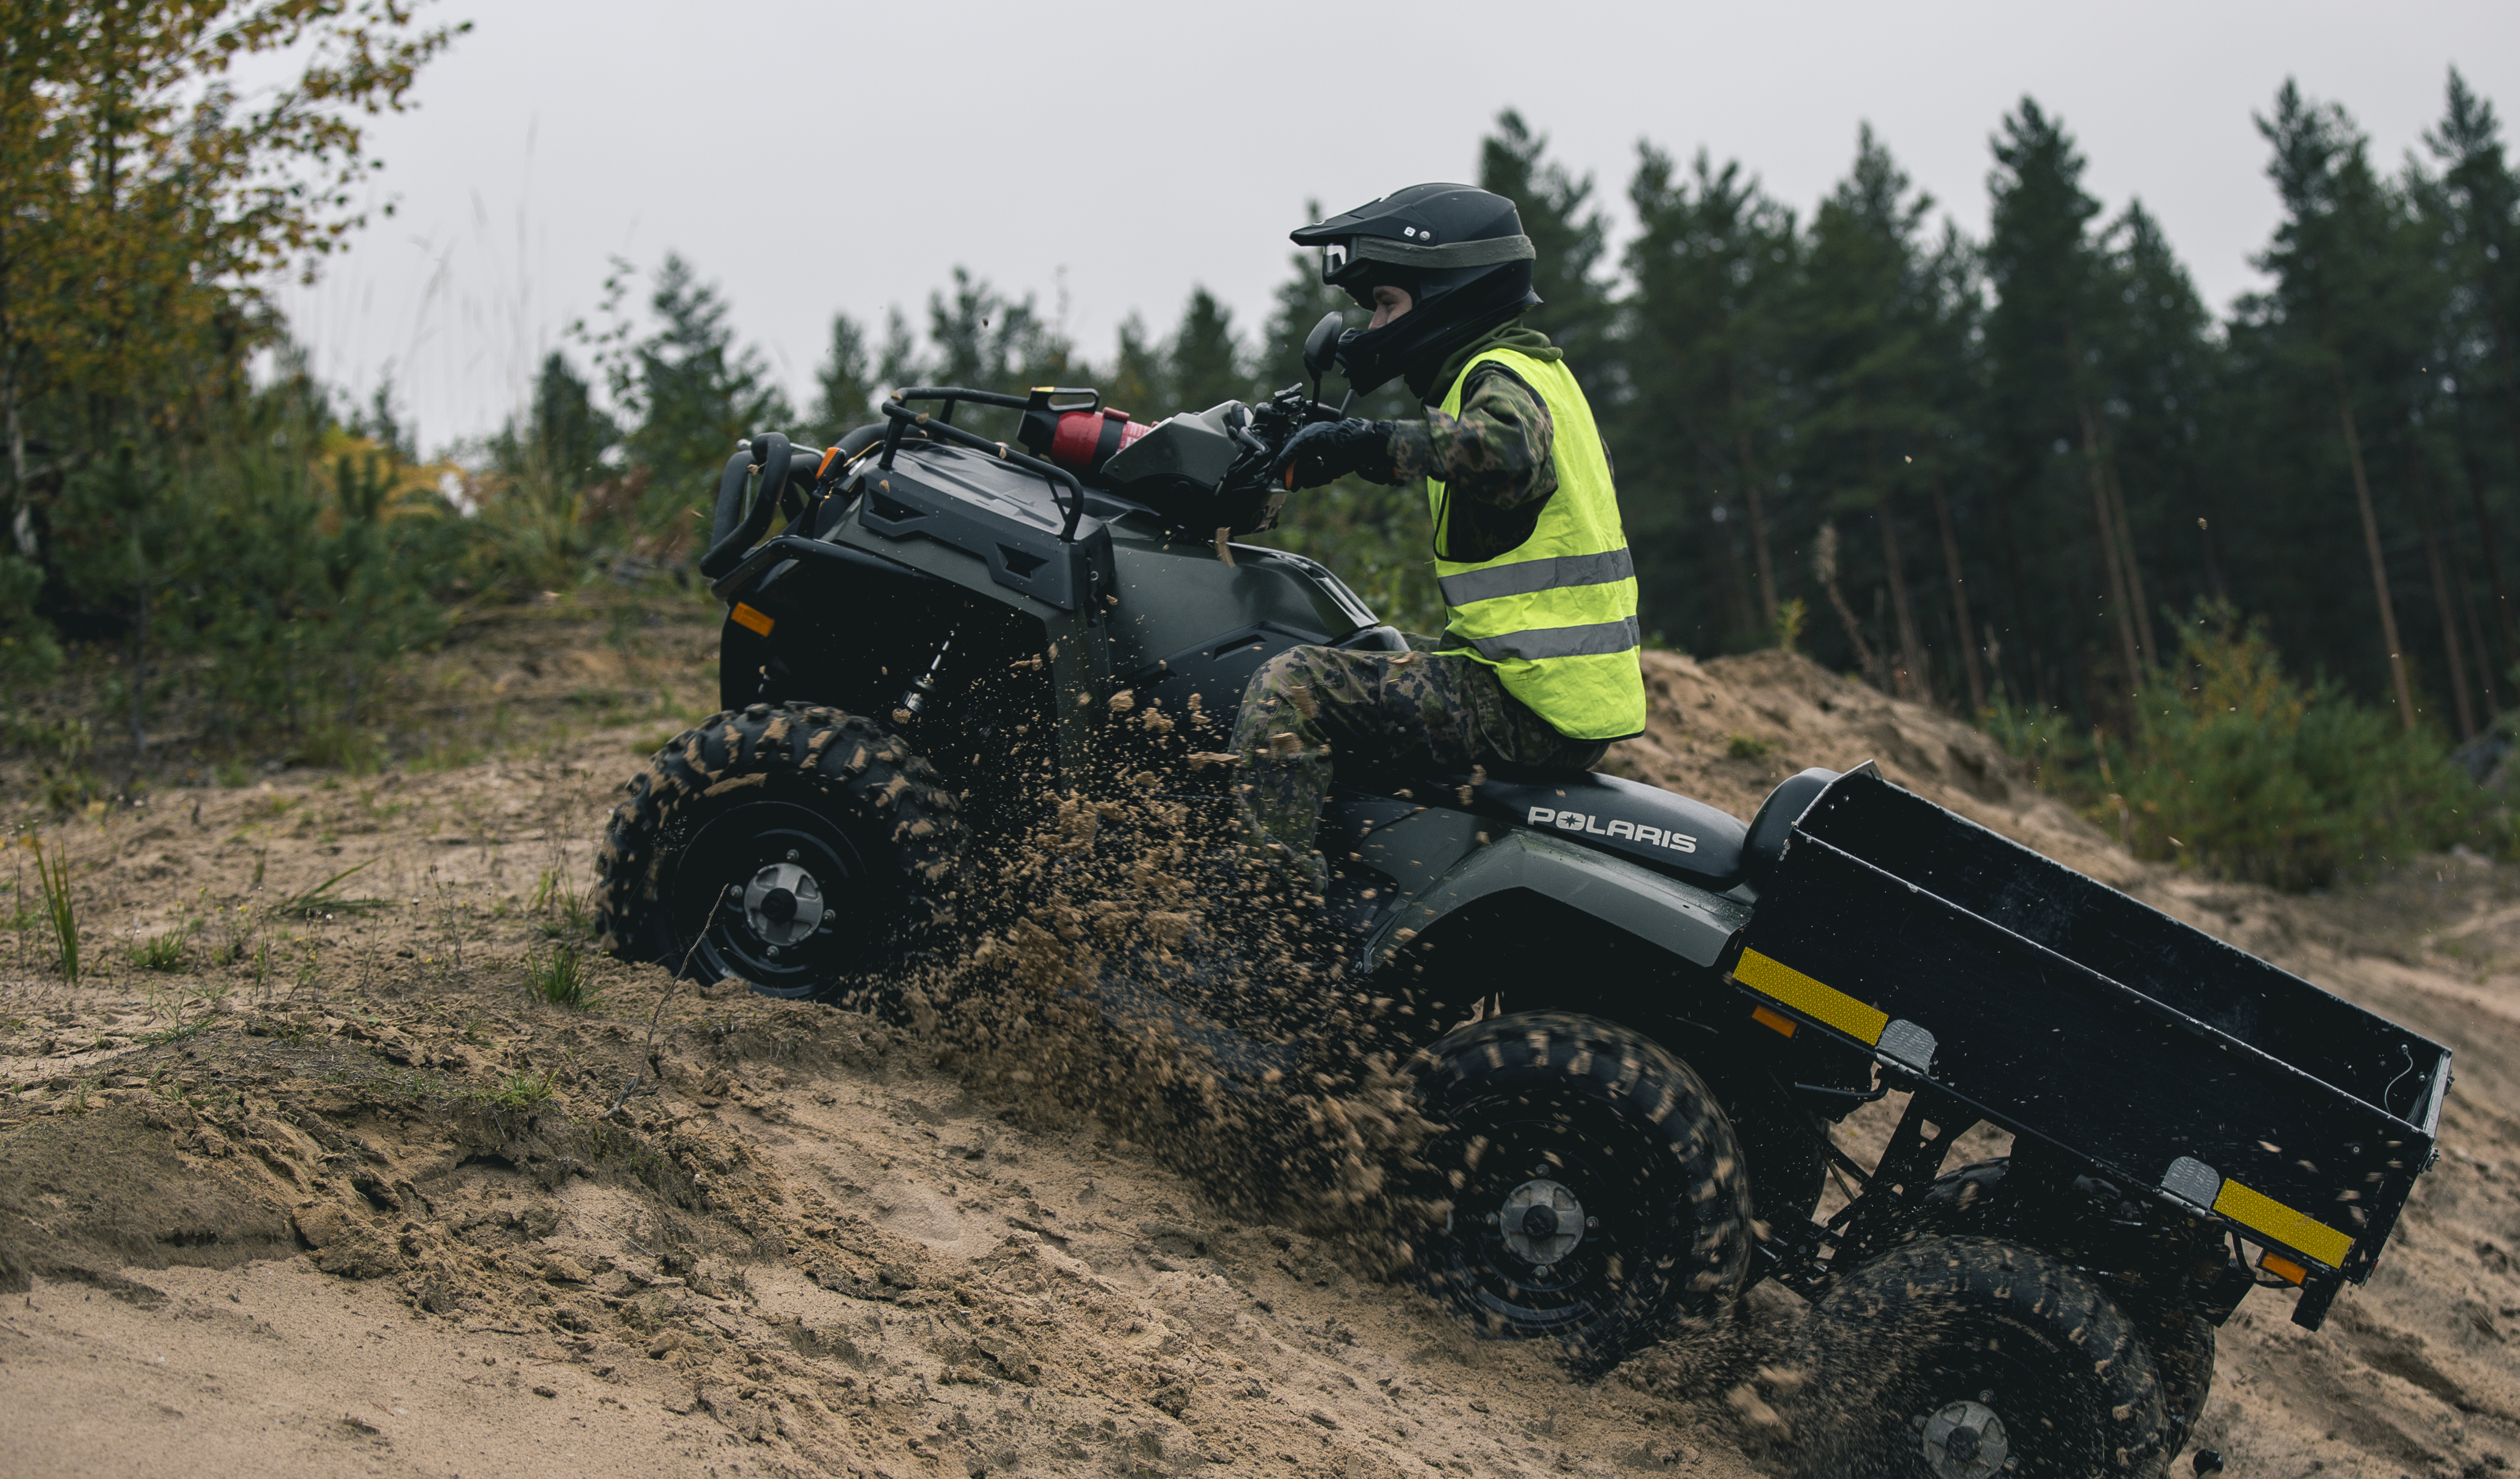 A soldier rides a quad bike on a sandy uphill with a safety vest on